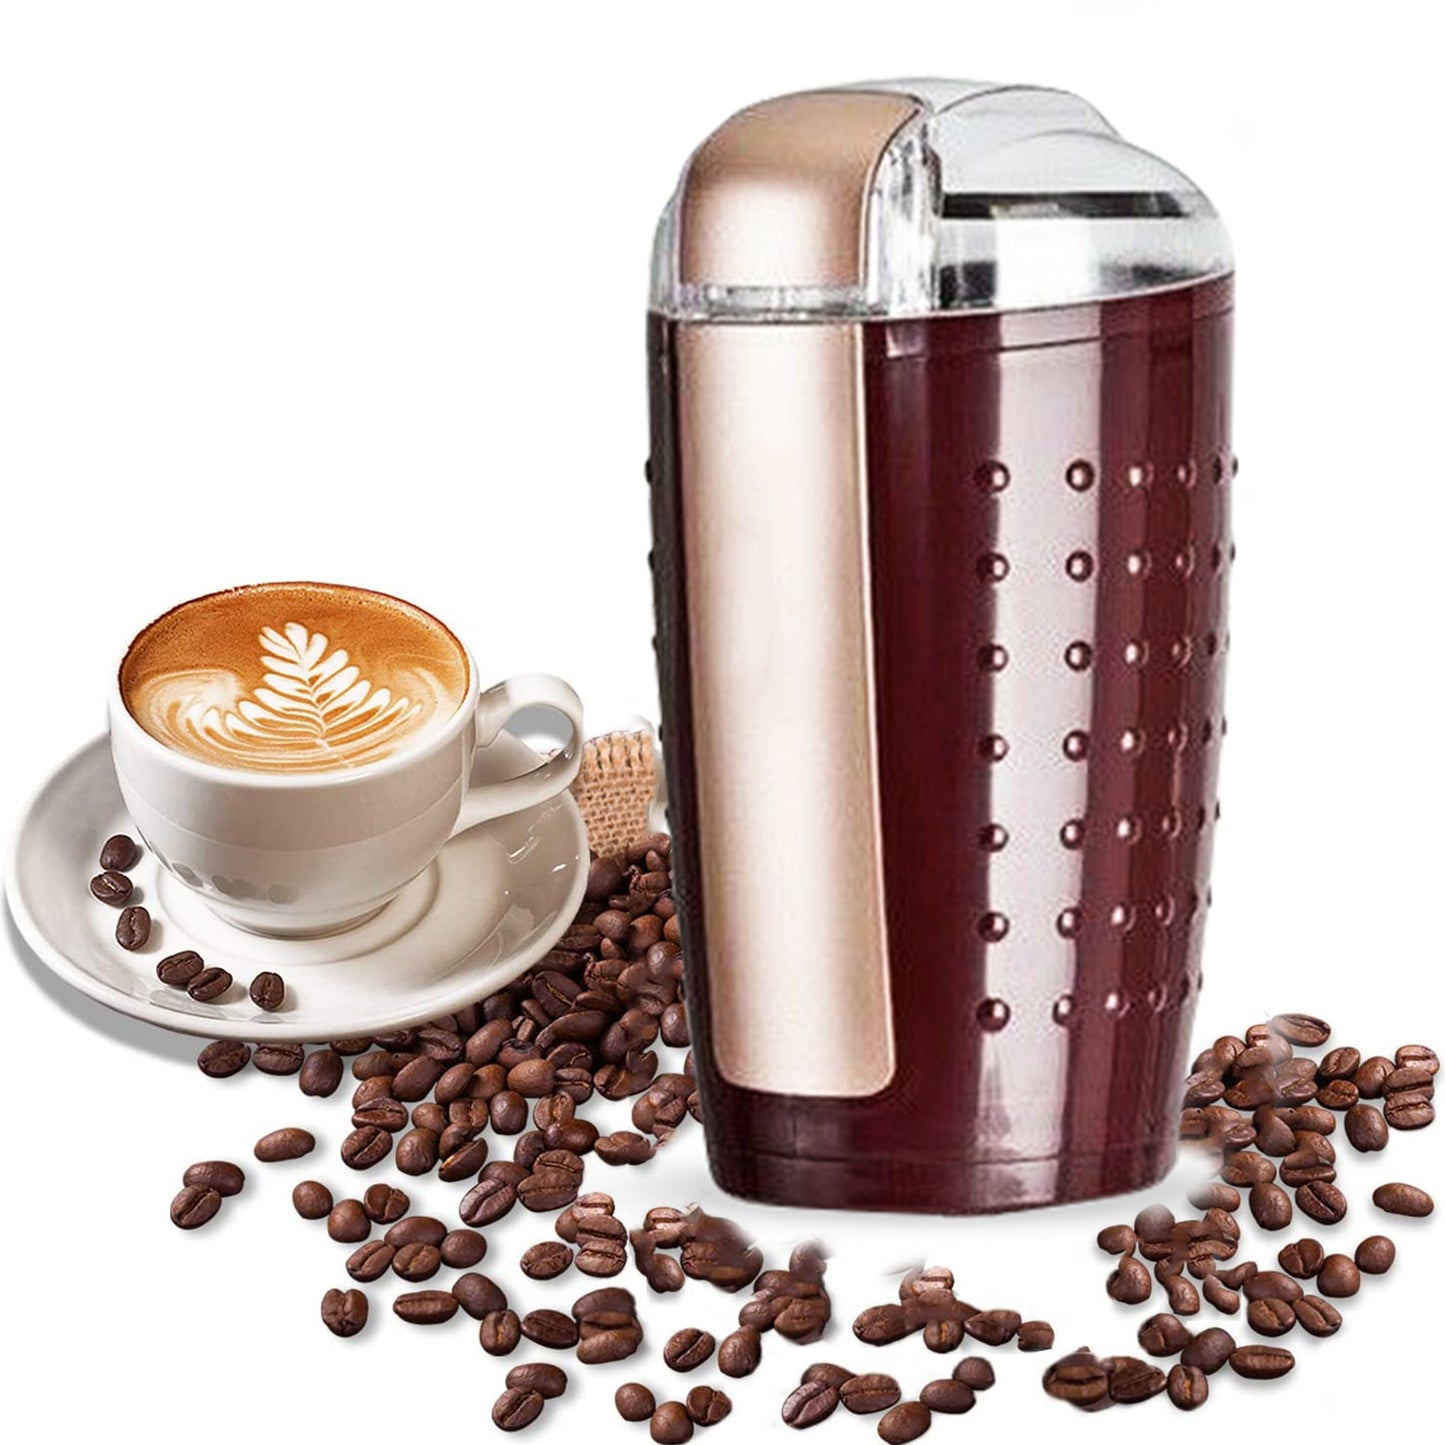 2 Pieces Electric Coffee Grinder Spice Grinders Large Portable Compact with Stainless Blade Grinder CG 01 BR & BL